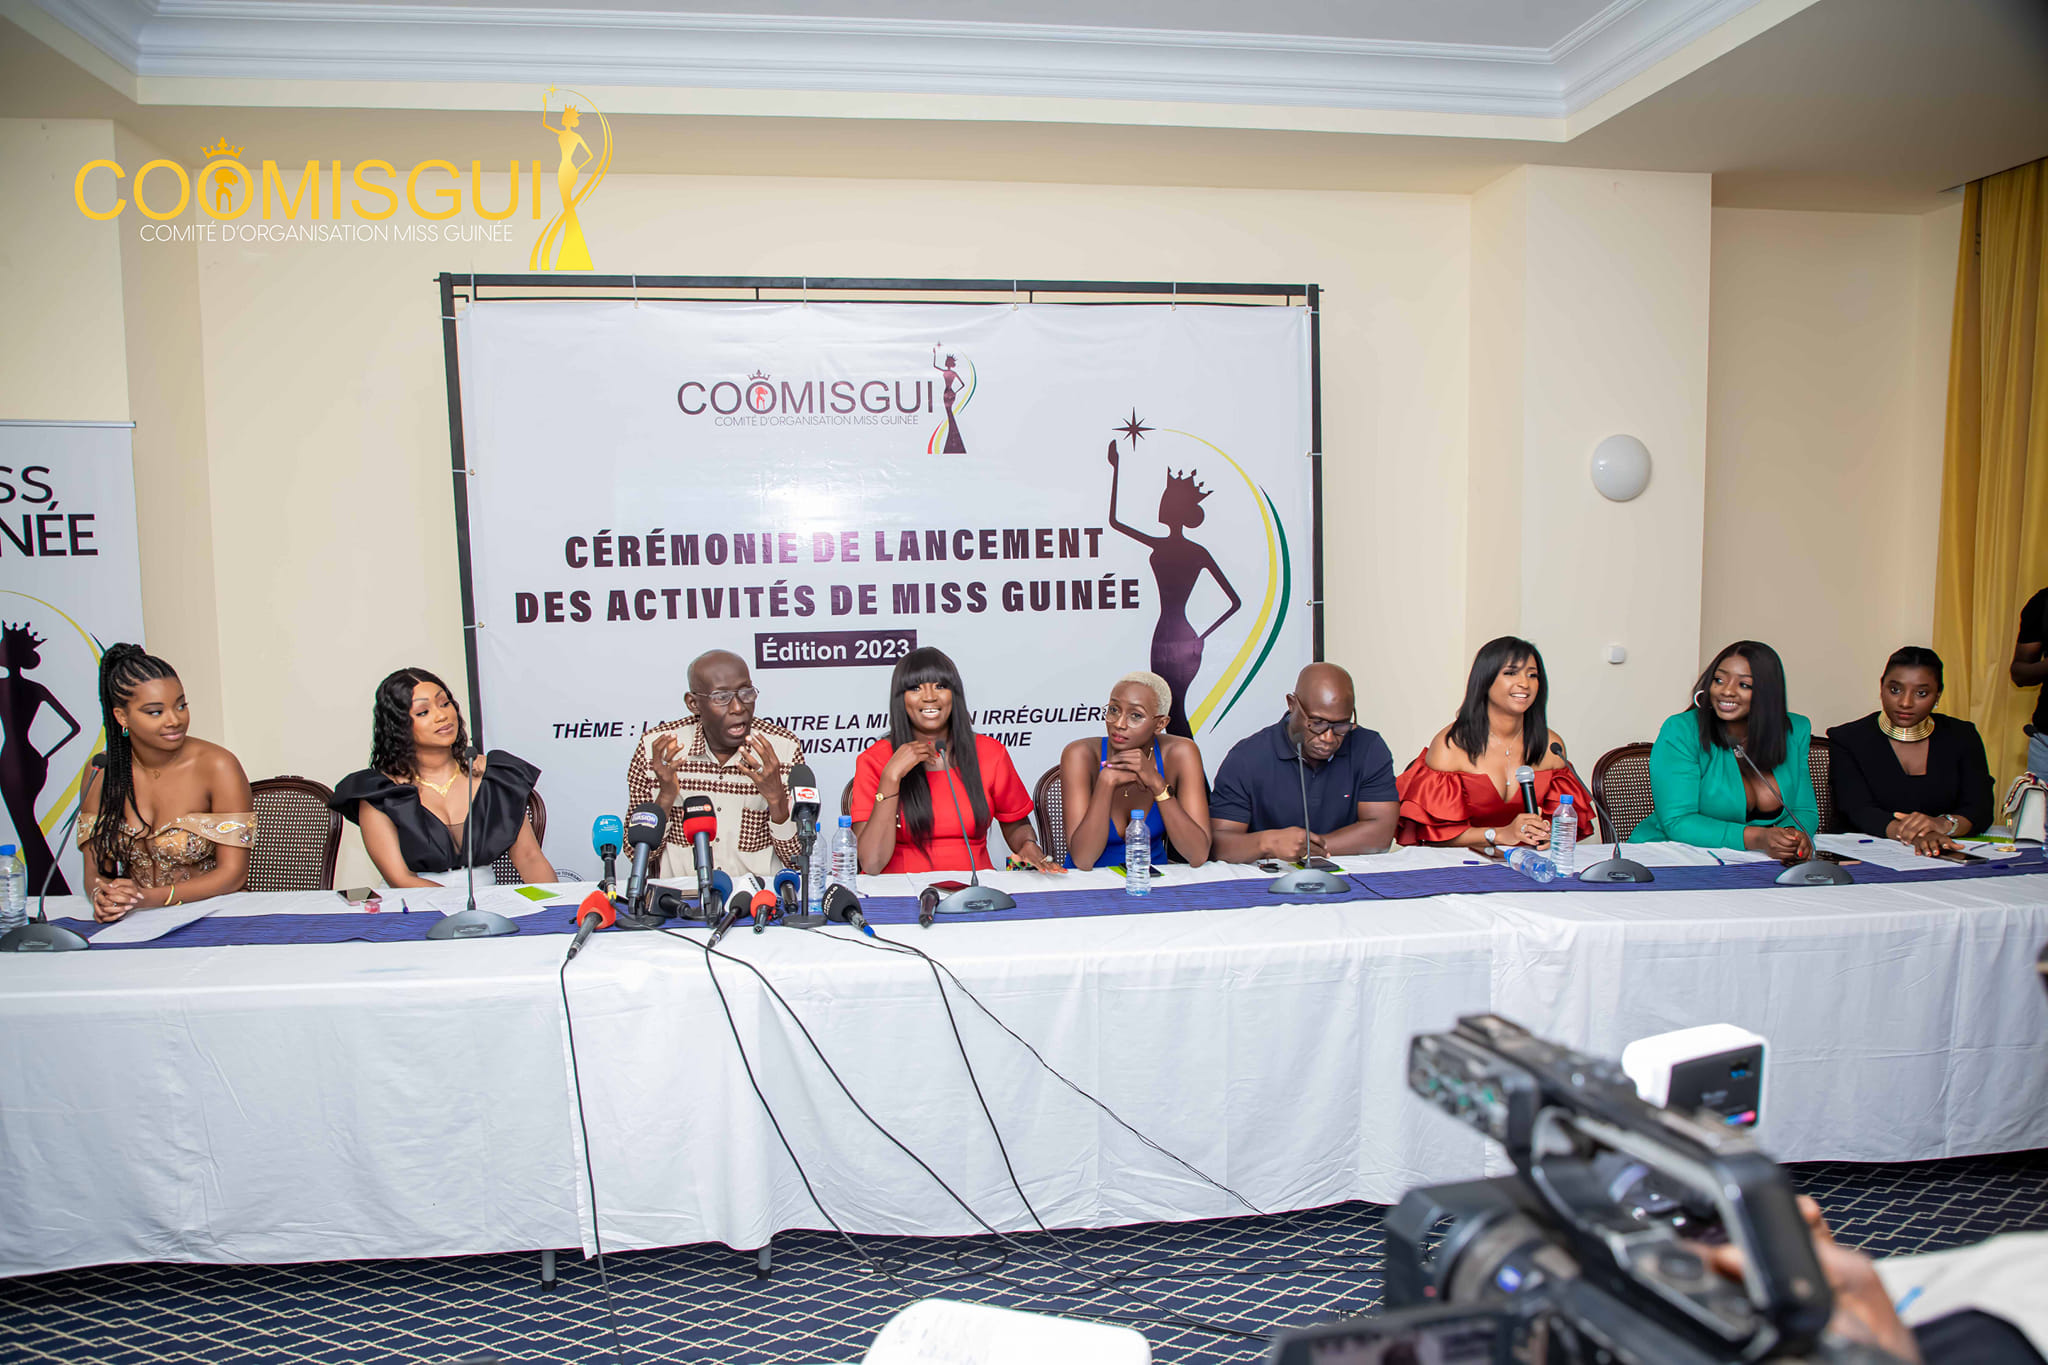 Press conference to announce the details of the Miss Guinea 2023 pageant